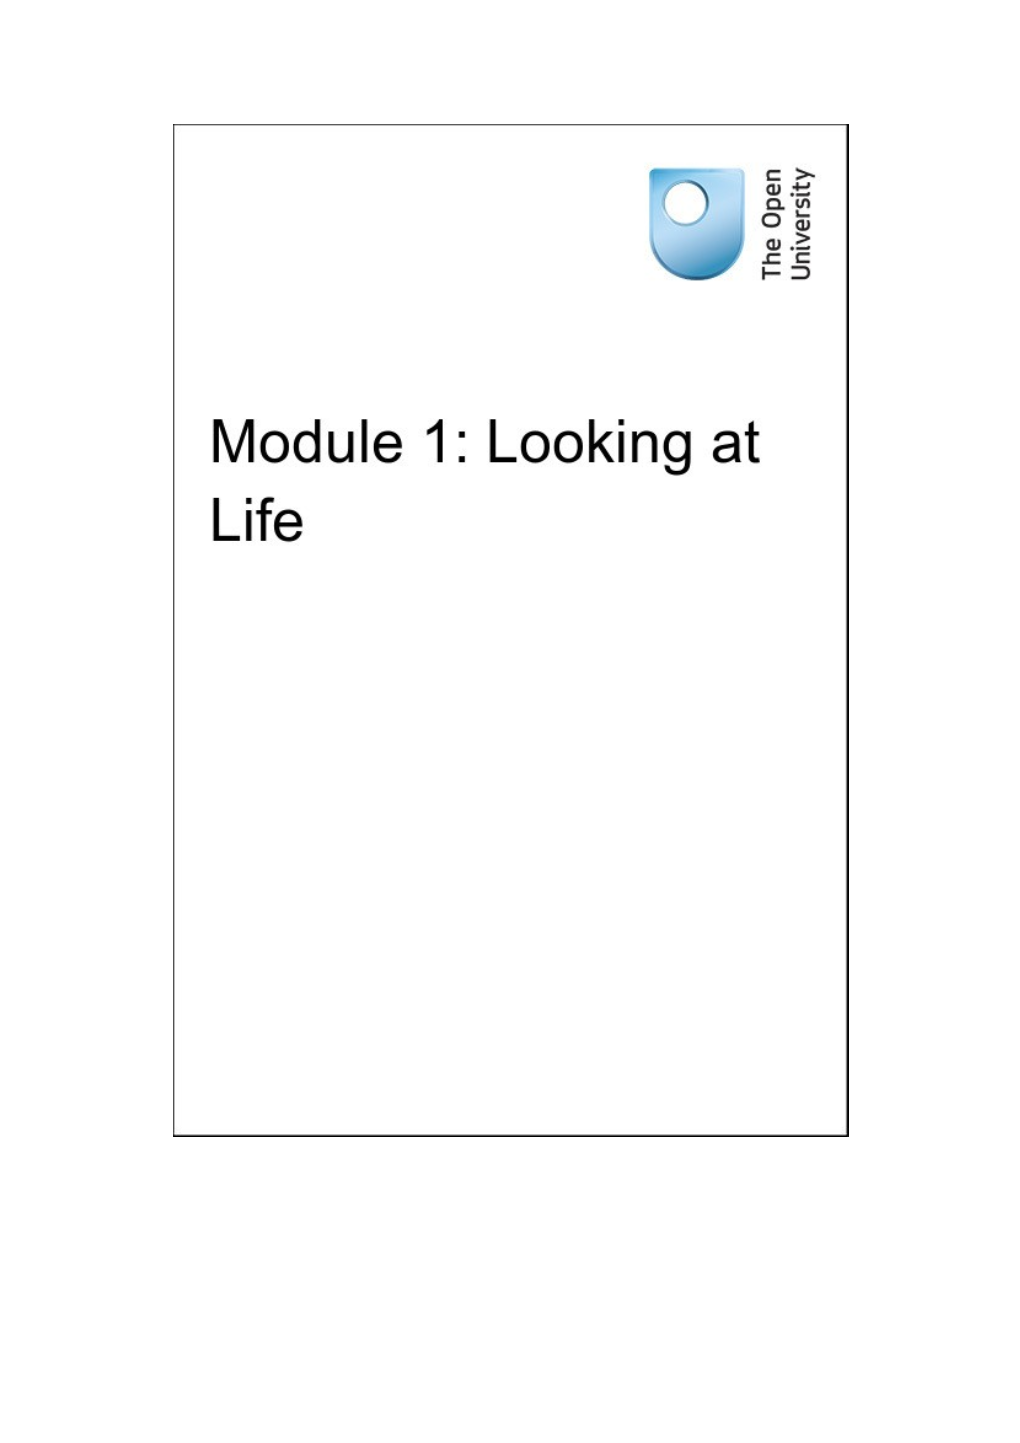 Module 1: Looking at Life